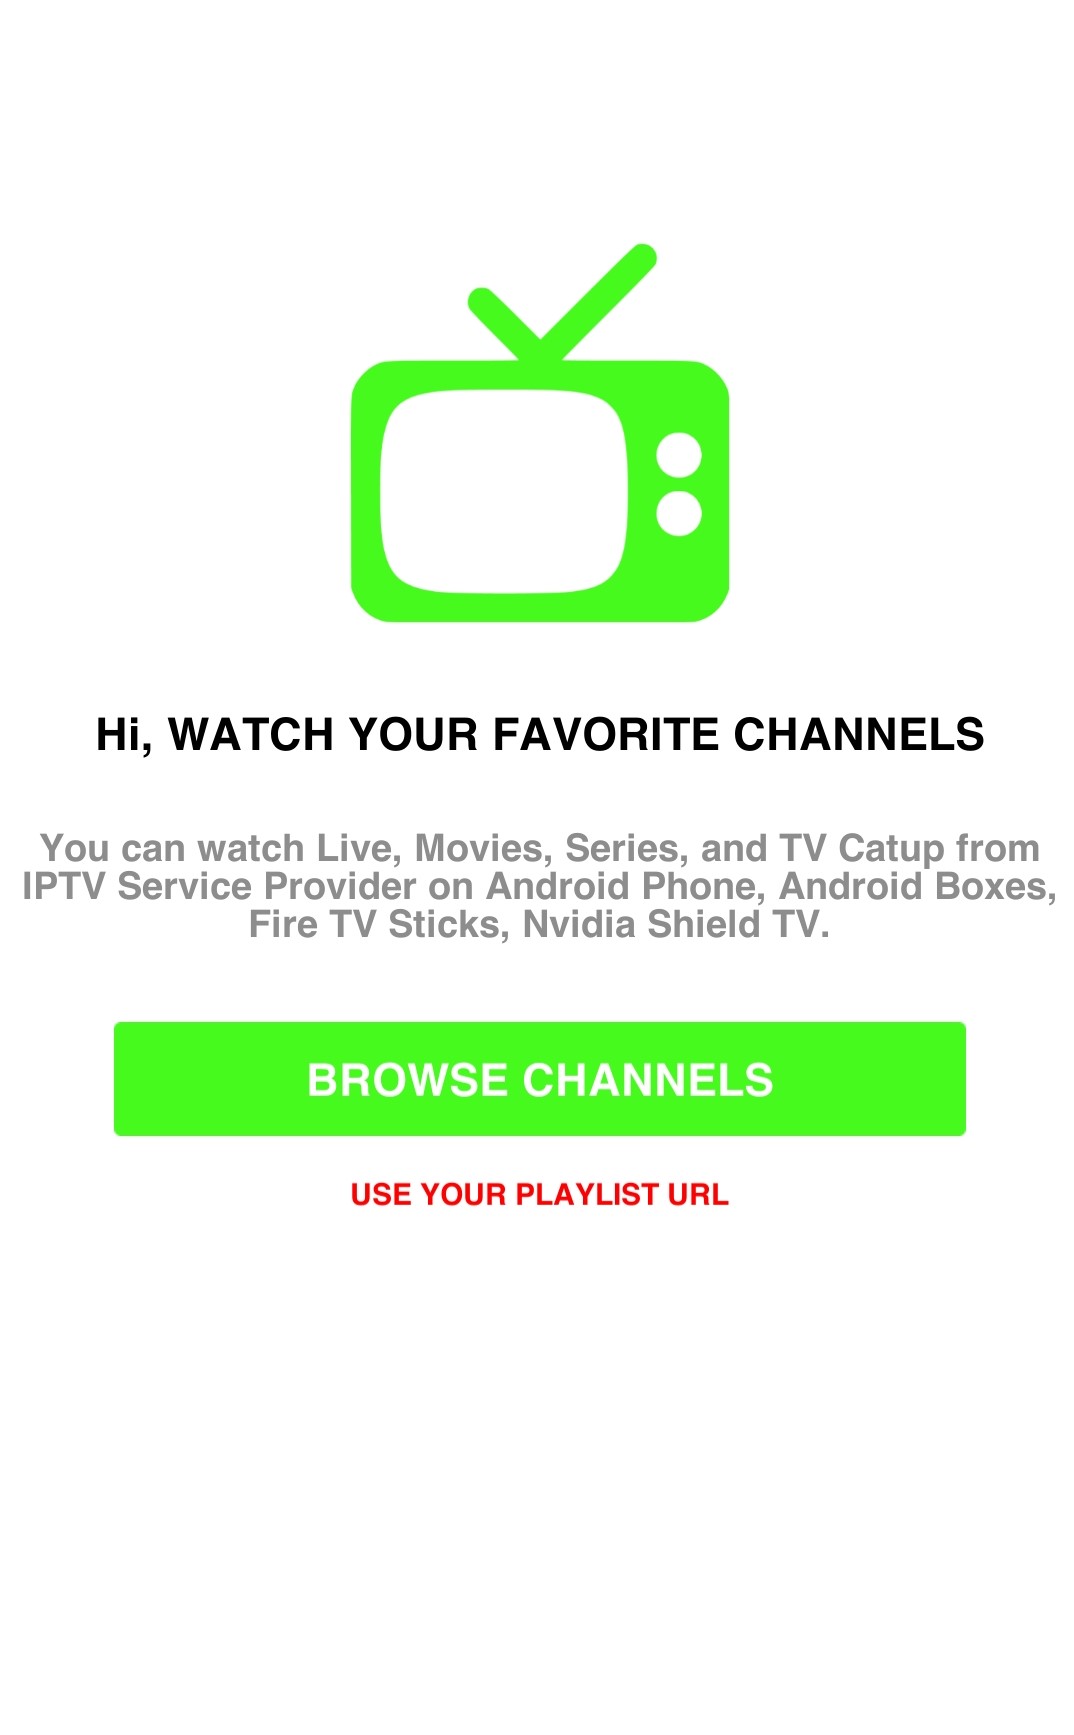 Select Use Your Playlist URL to stream Best Cast TV IPTV